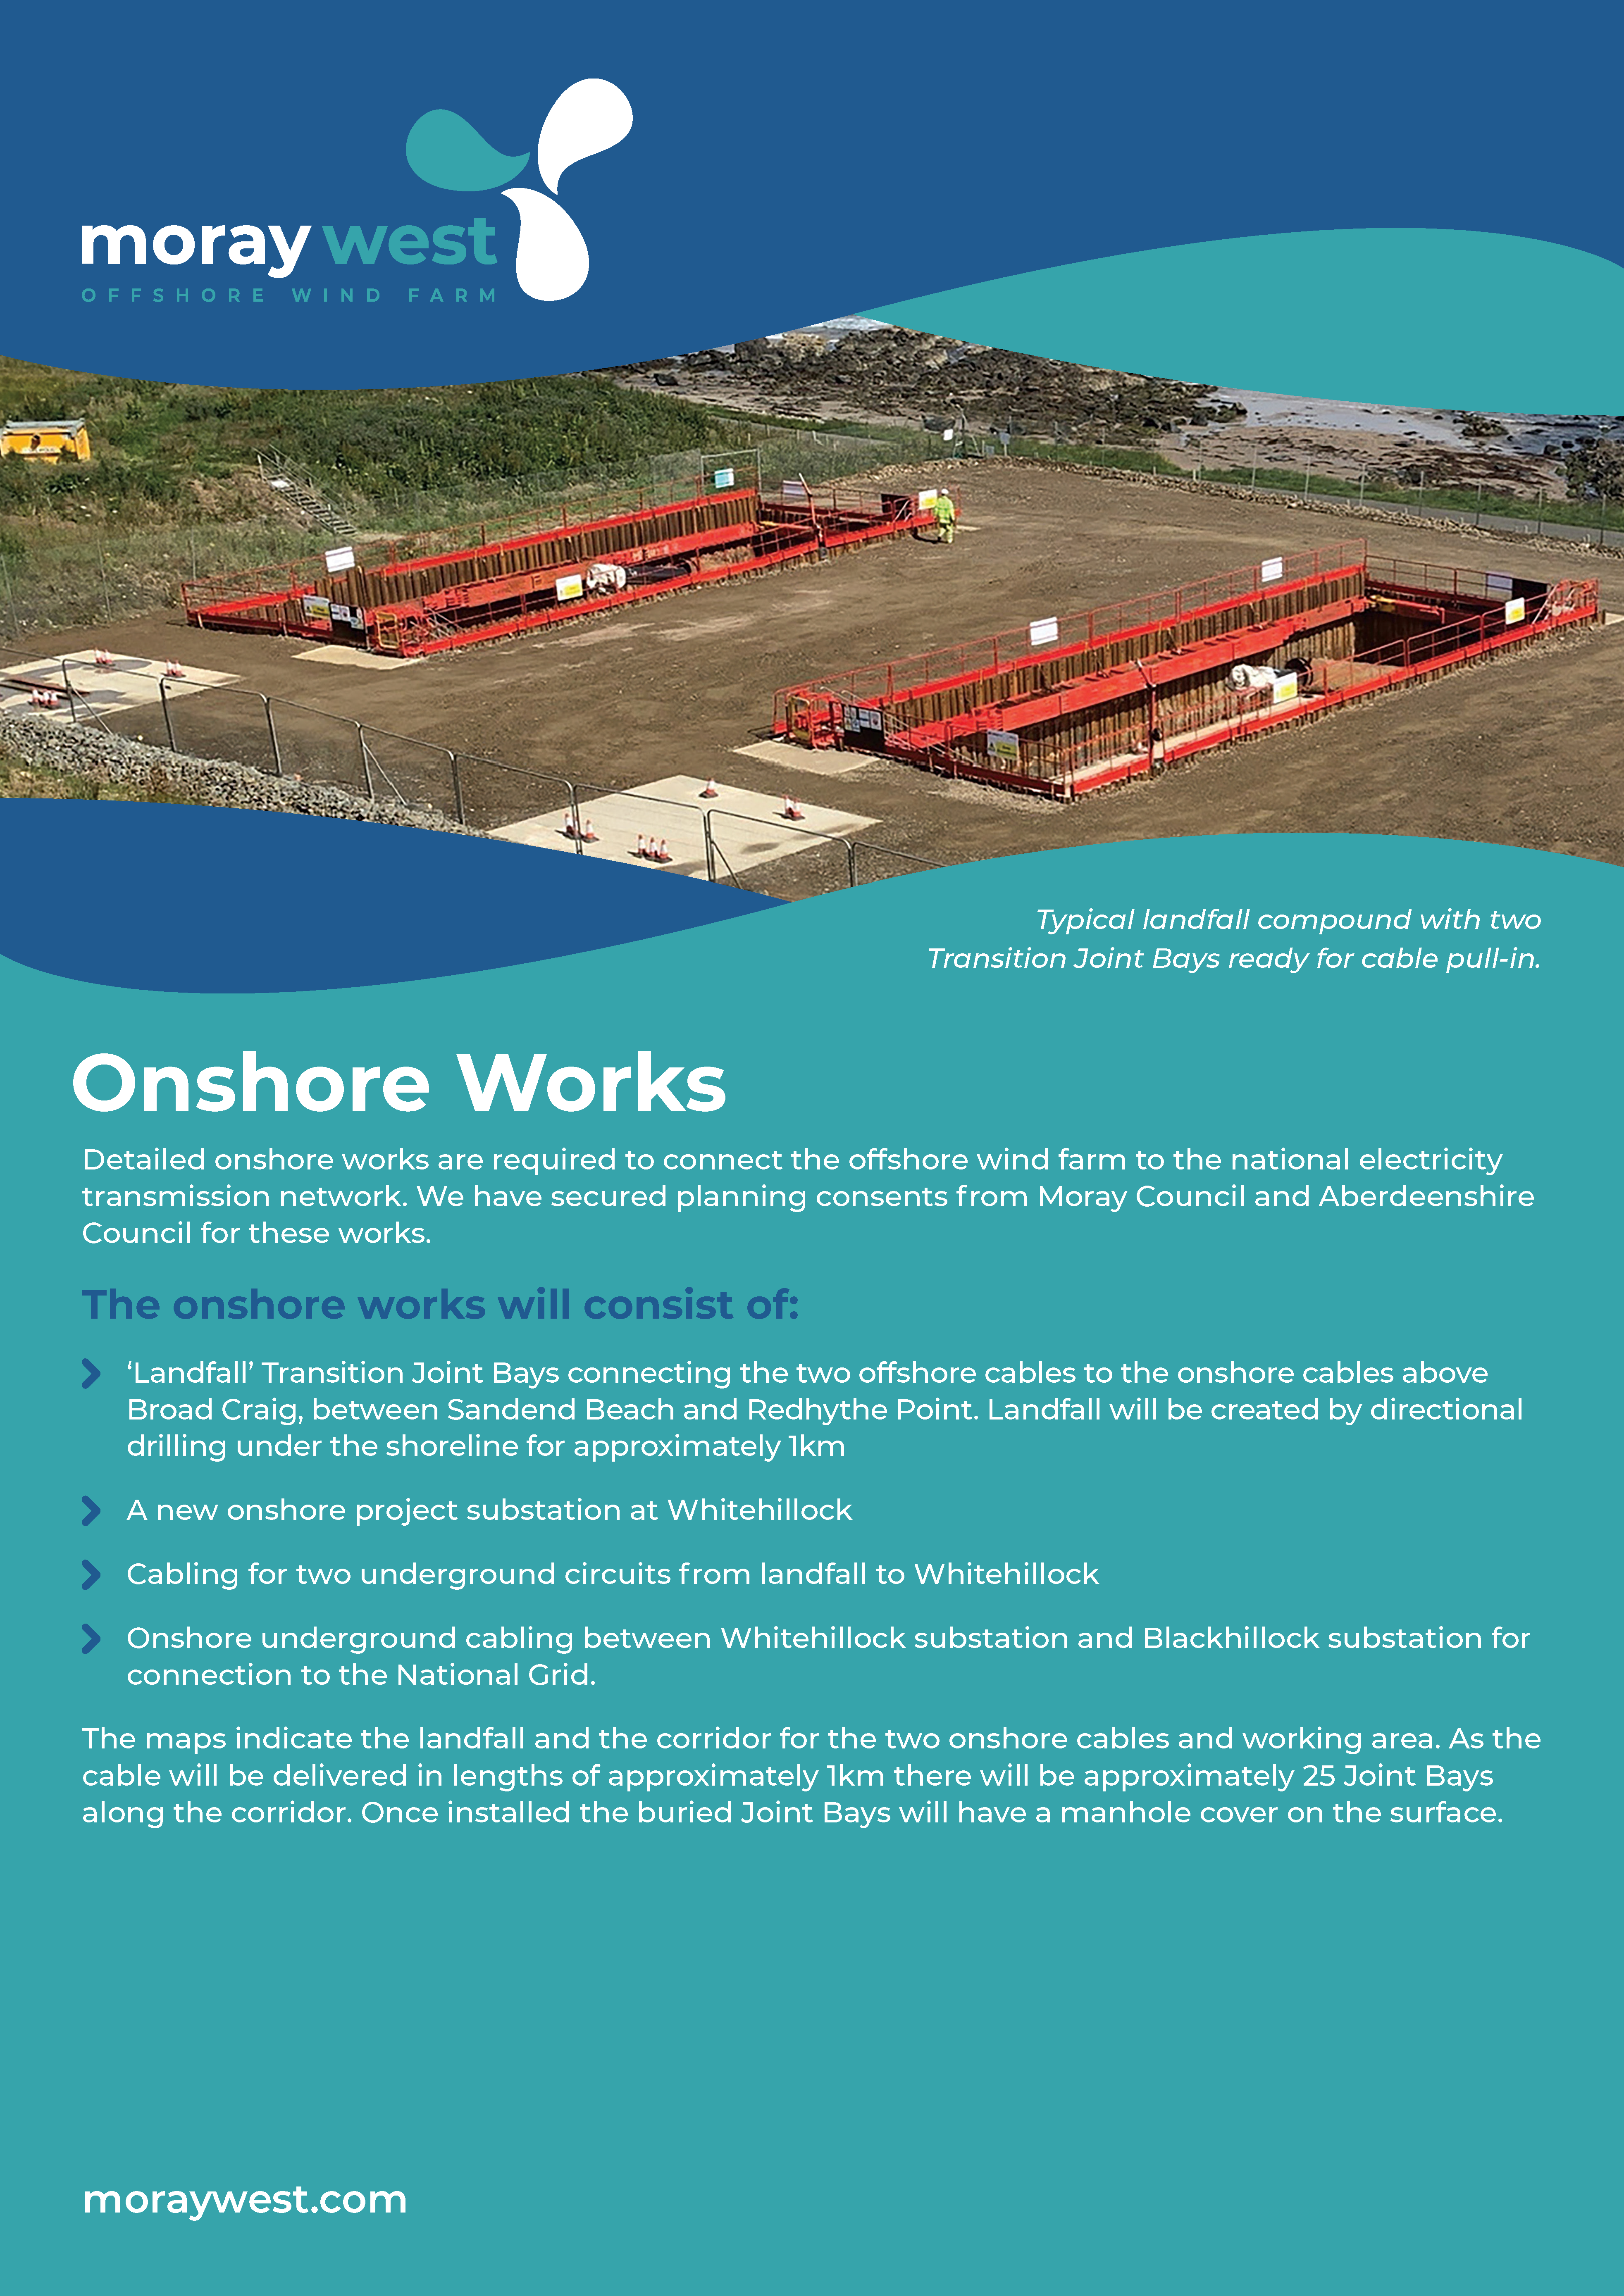 Onshore works